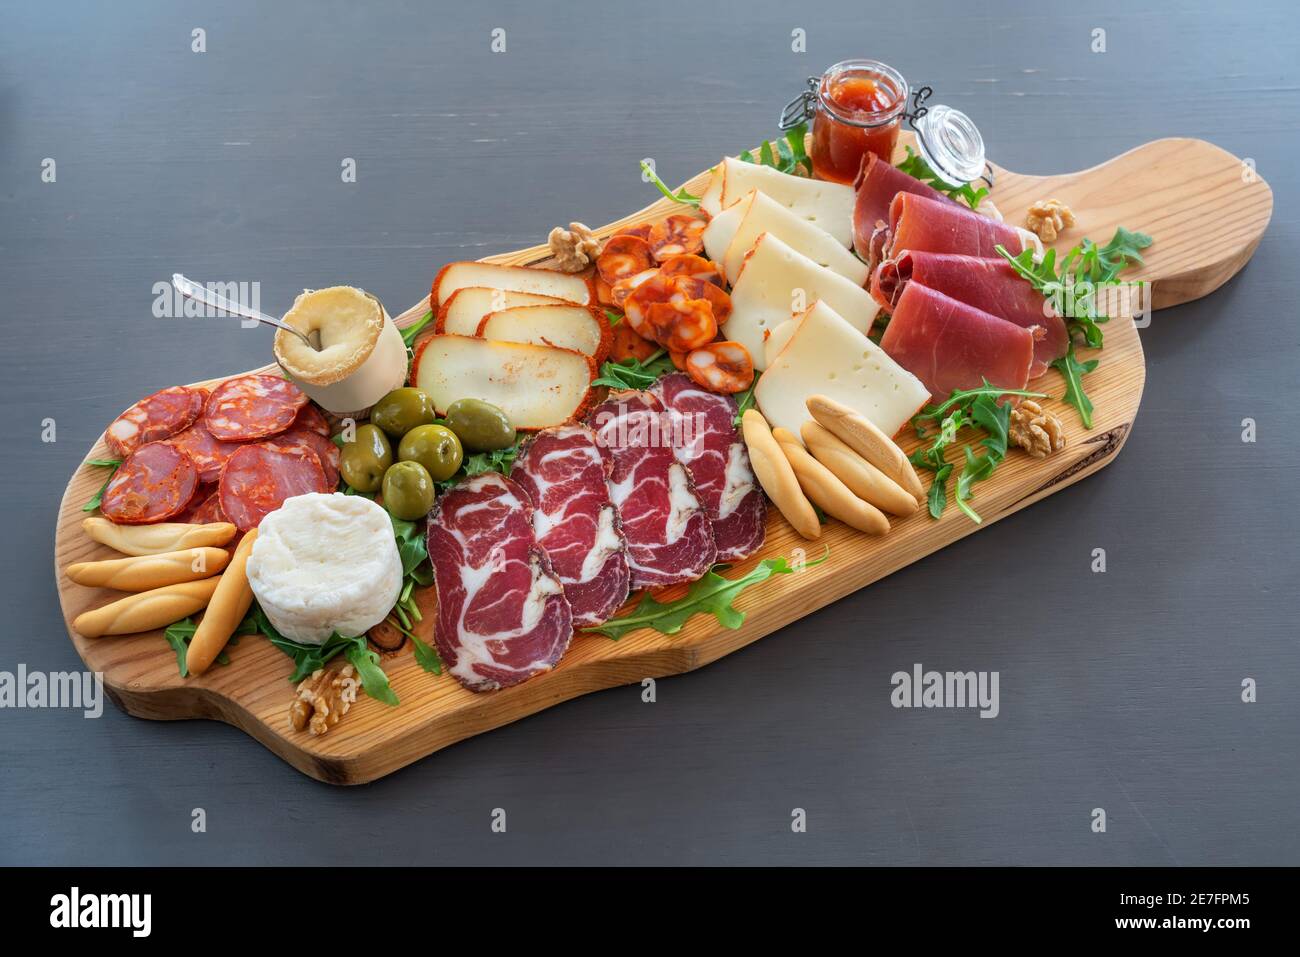 Very colorful tapas board of charcuterie with cheese and smoked meats. Decorated with arugula and walnuts. Stock Photo